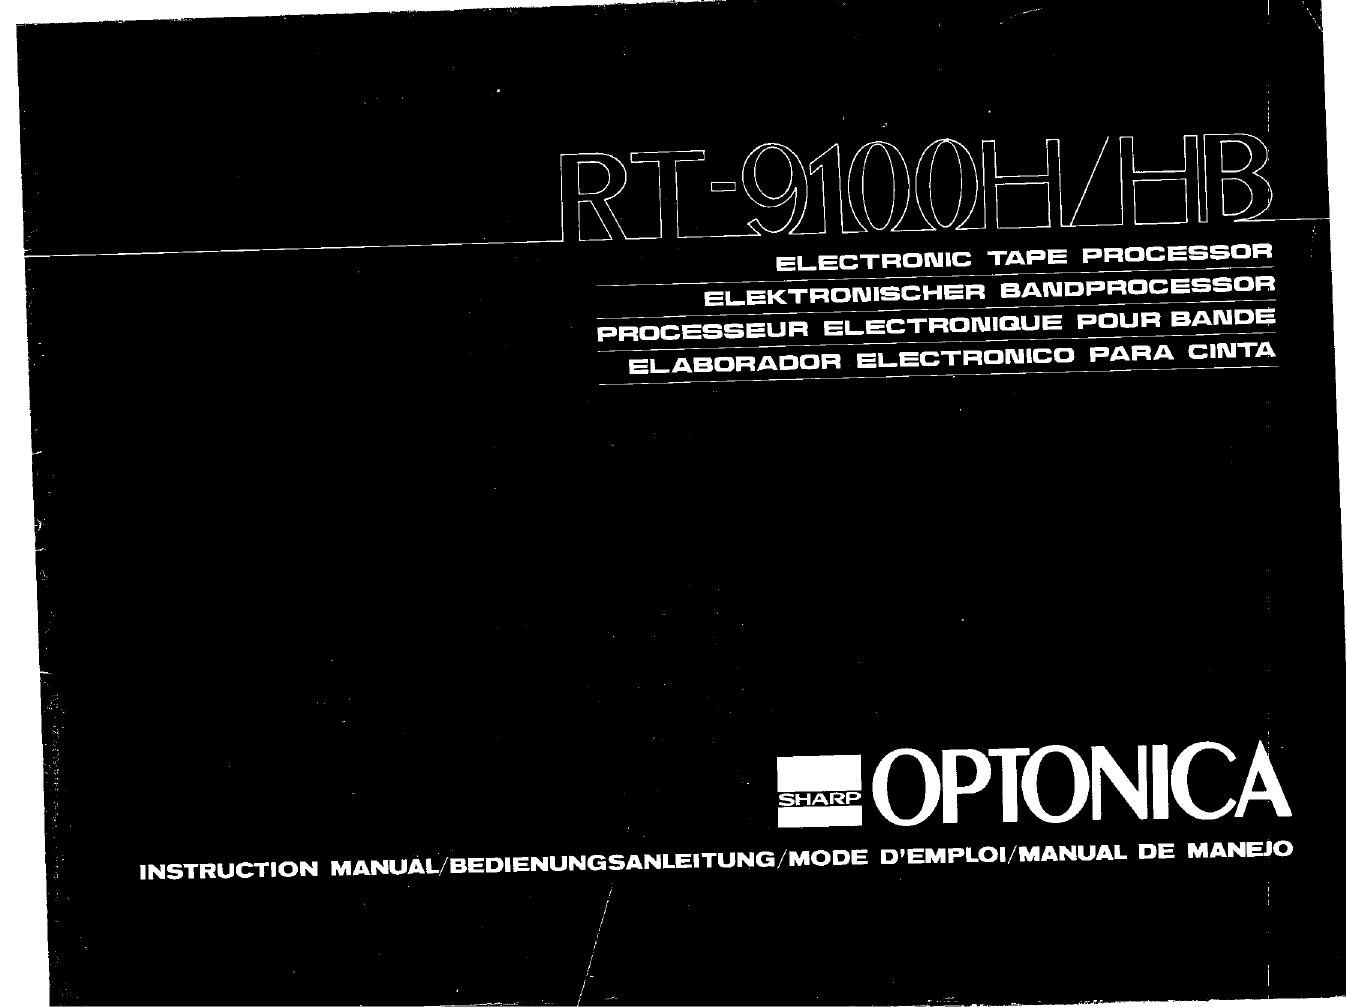 optonica rt 9100 hb owners manual